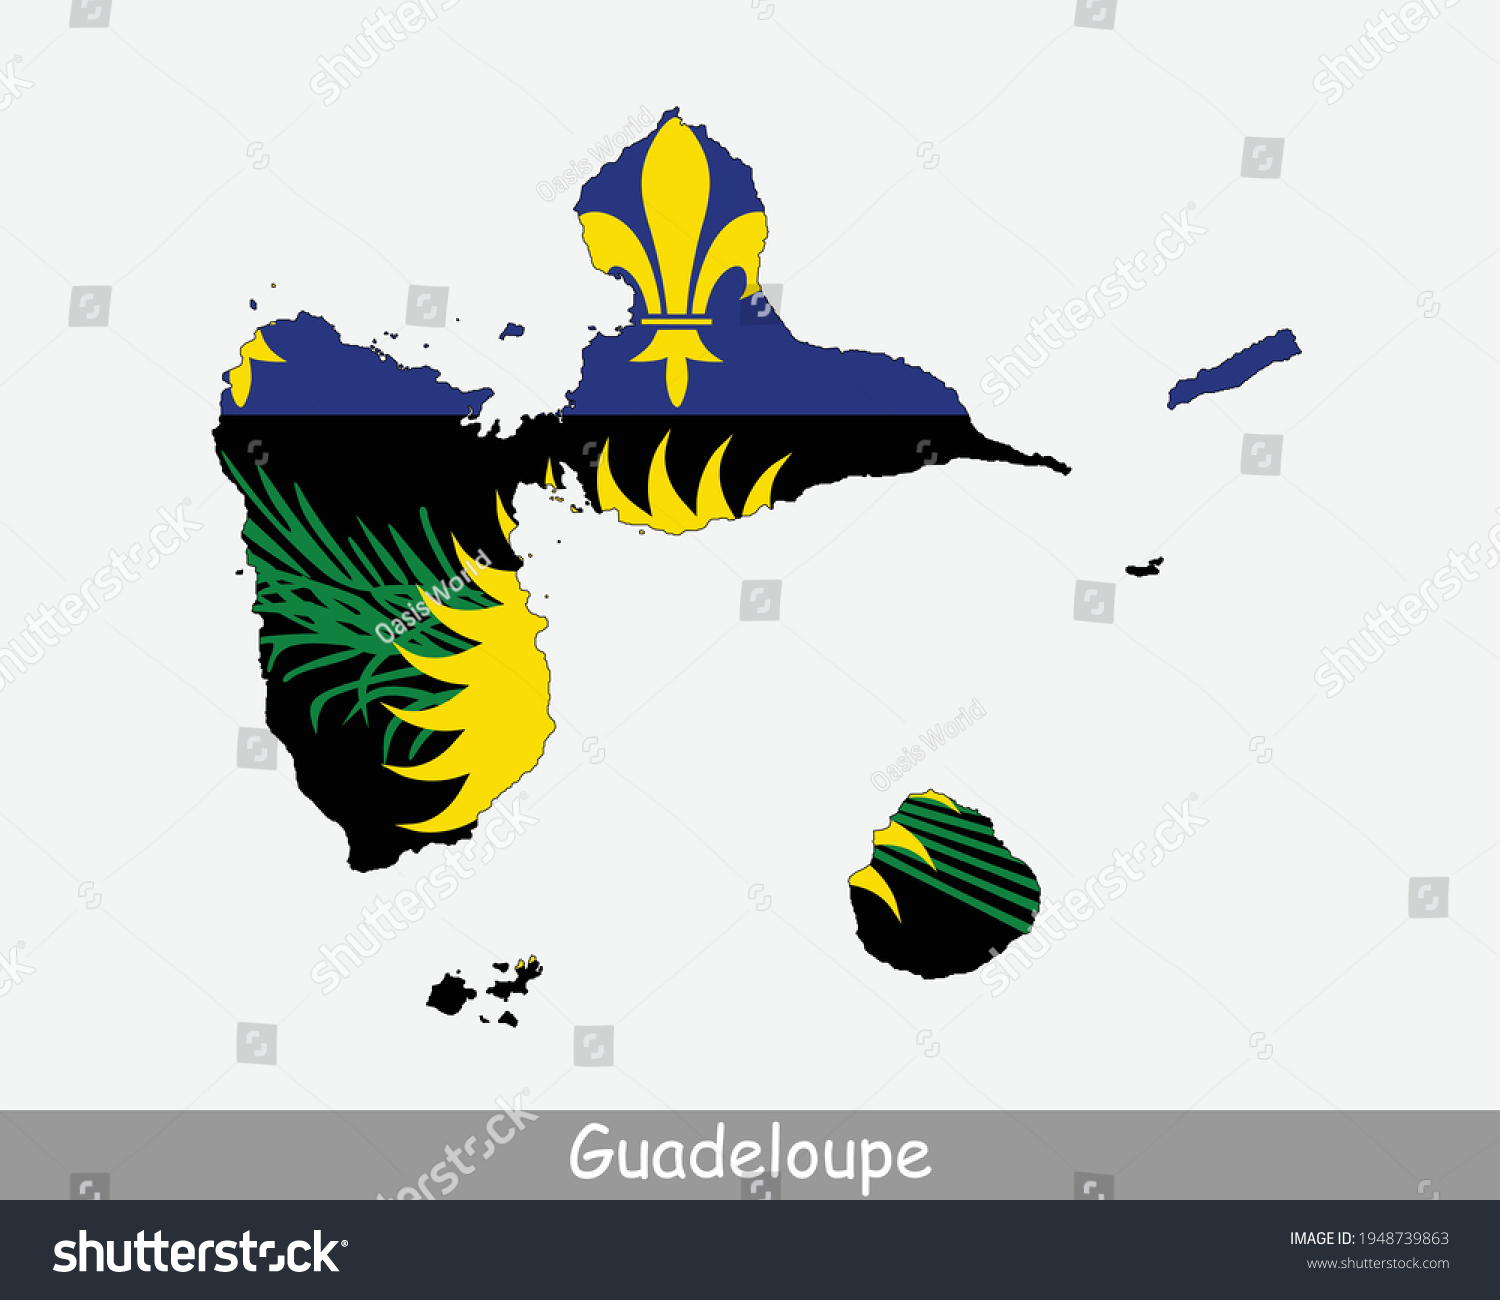 SVG of Guadeloupe Map Flag. Map of Guadeloupe with flag isolated on white background. Overseas department and region of France. Vector illustration. svg